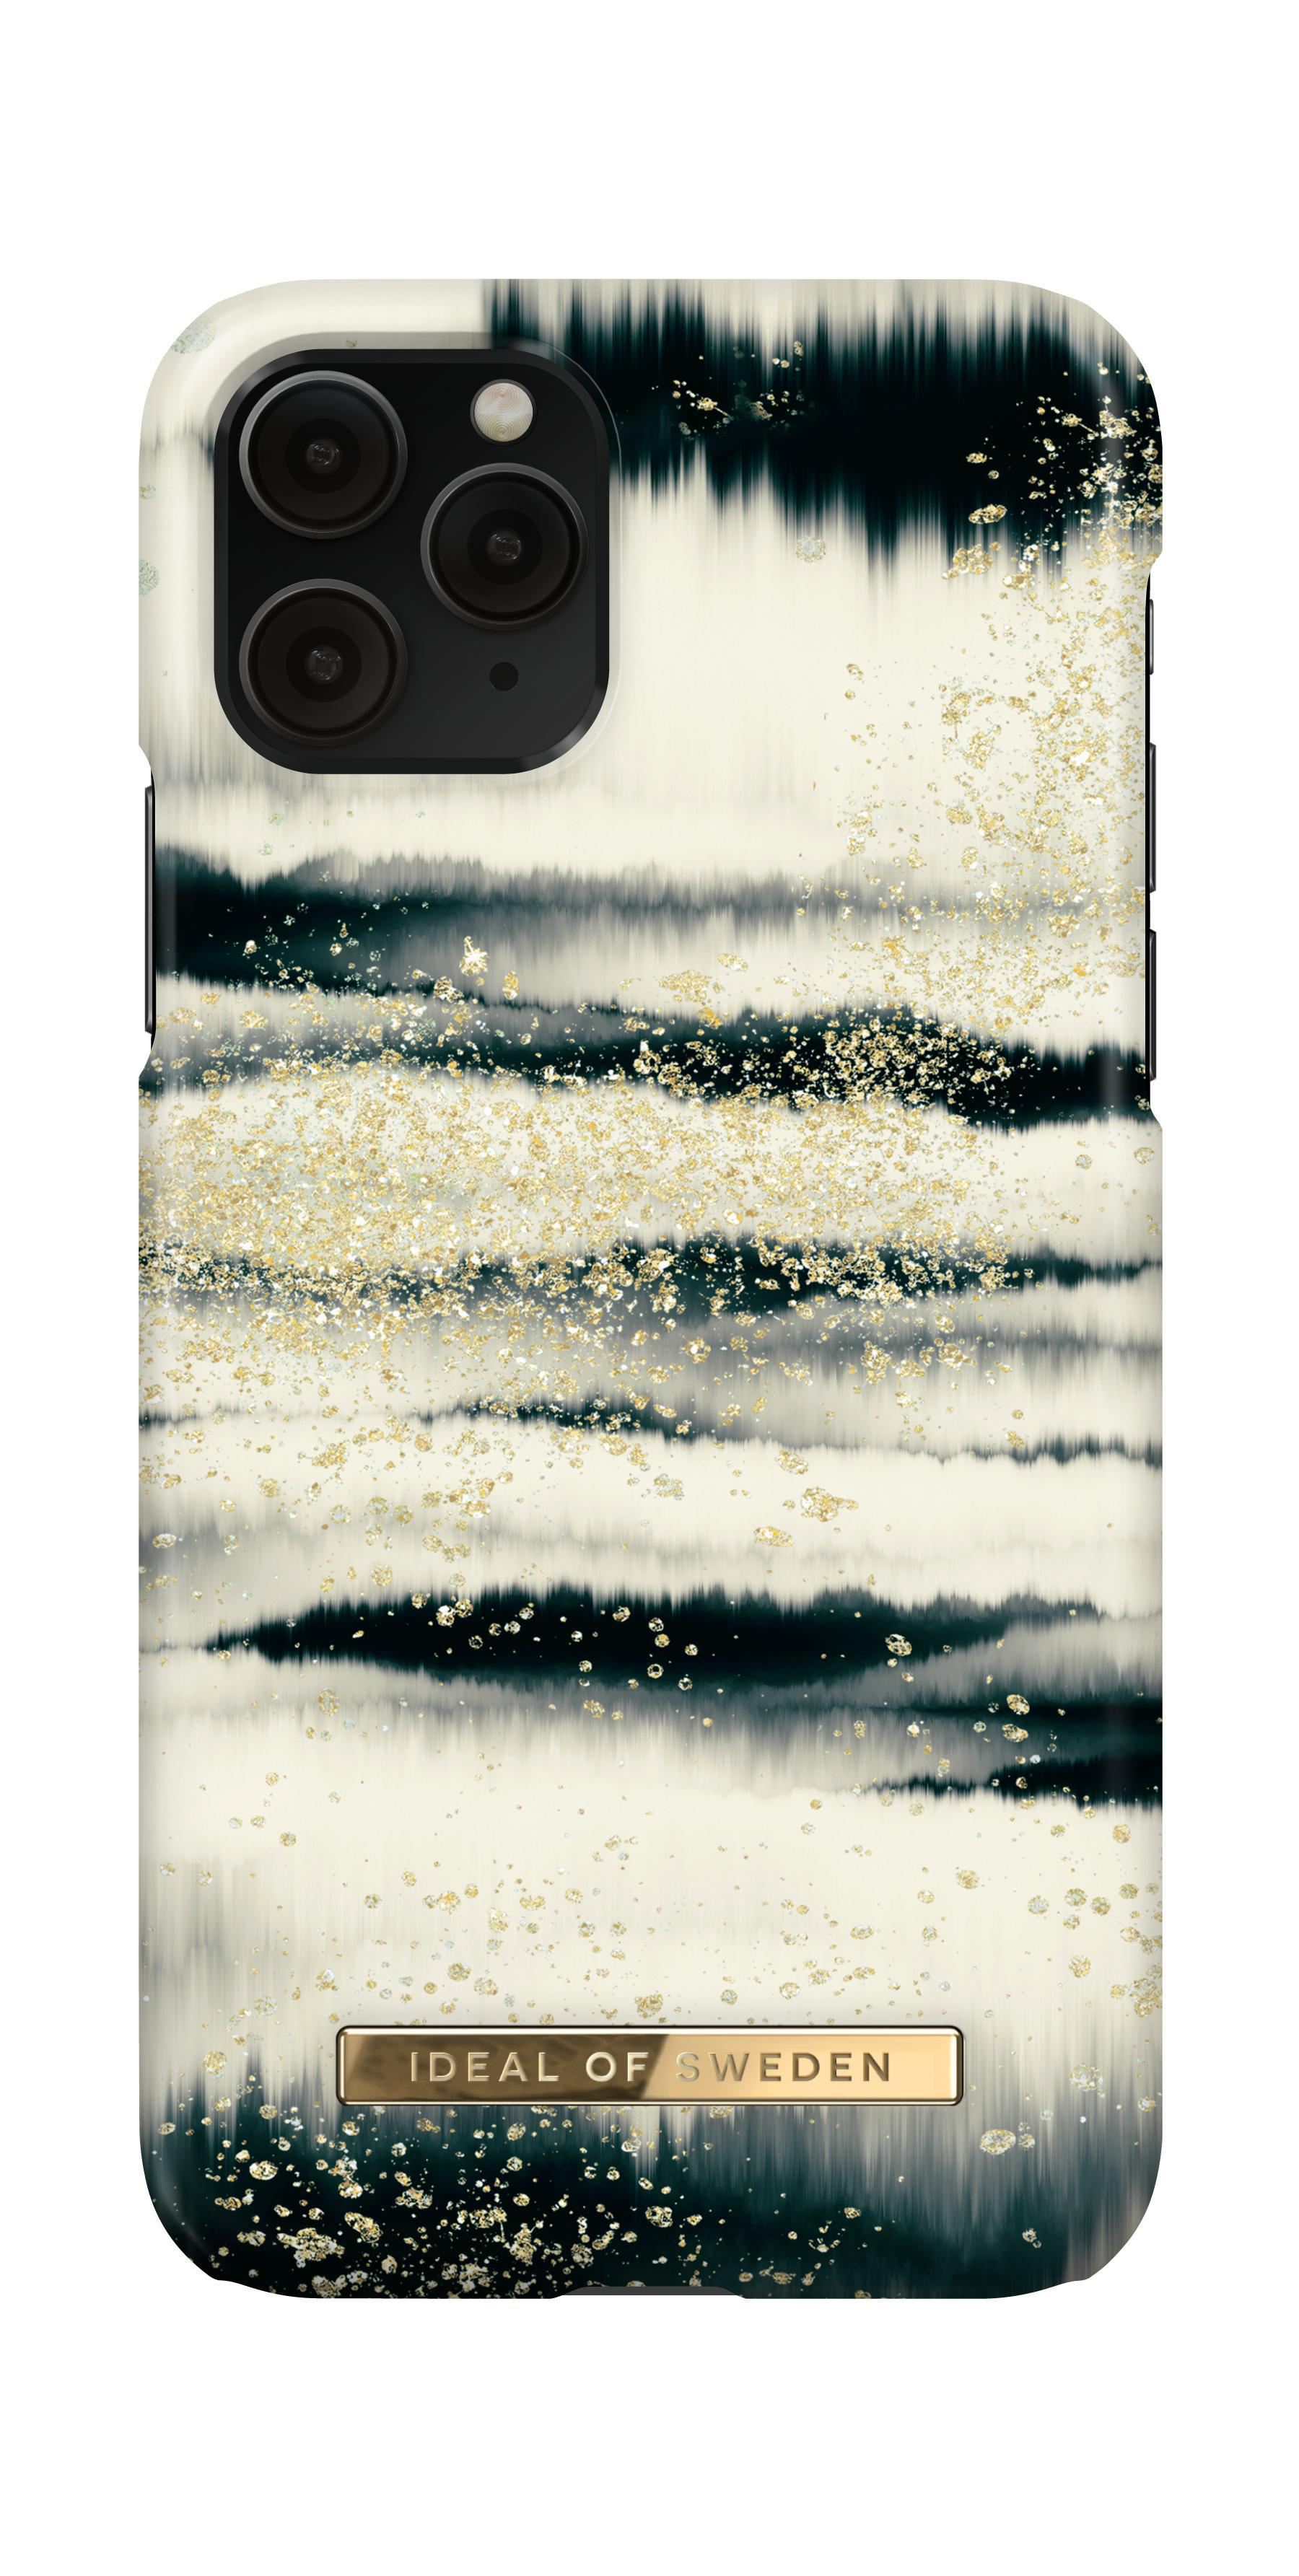 iPhone OF SWEDEN iPhone Apple, IDEAL Fashion, Black/Gold Backcover, Pro, XS, 11 X, iPhone